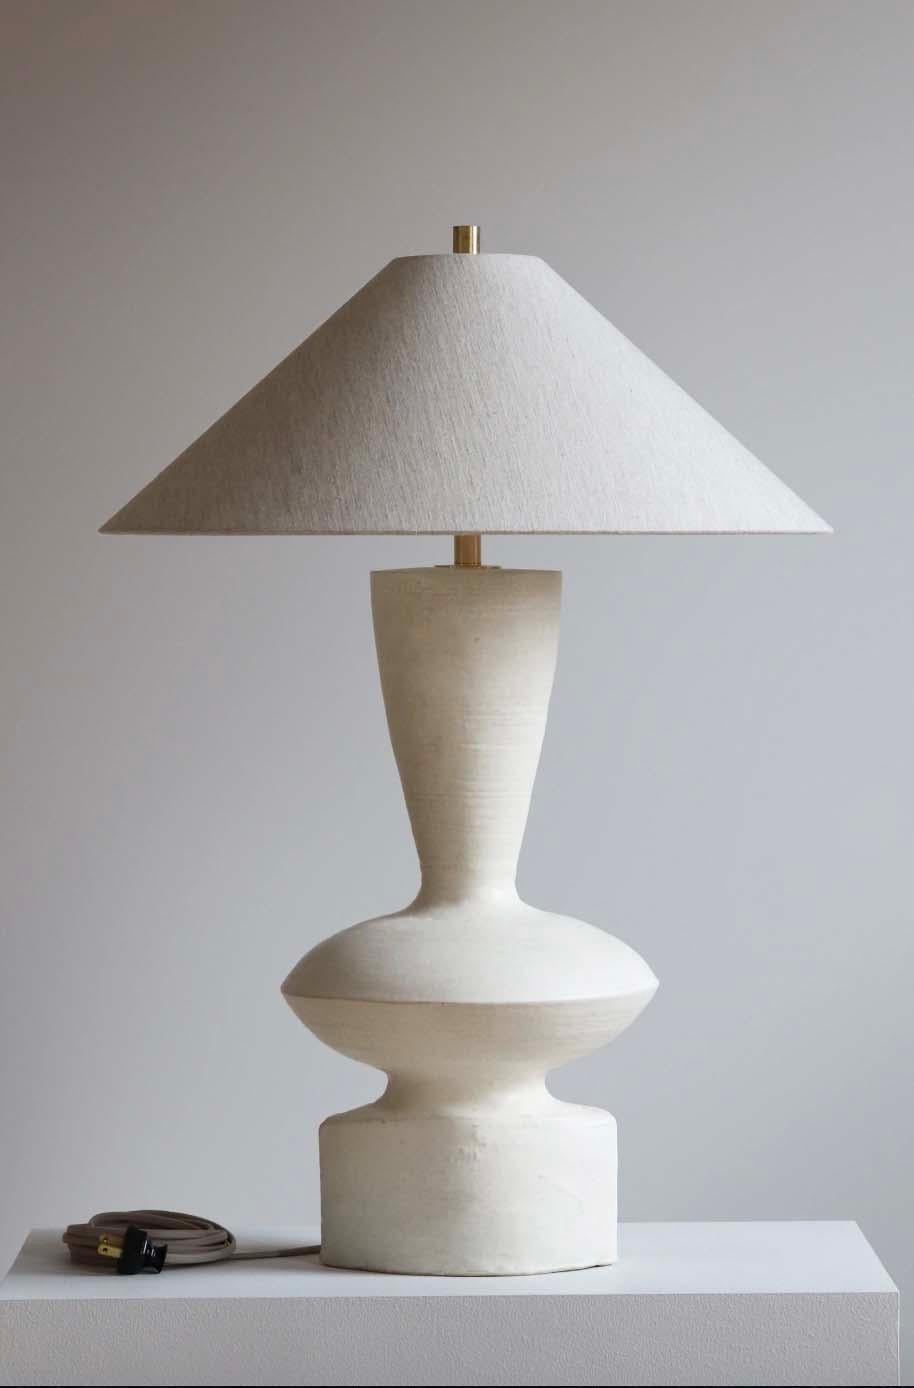 The Luna lamp is handmade studio pottery by ceramic artist by Danny Kaplan. Shade included. Please note exact dimensions may vary.

Born in New York City and raised in Aix-en-Provence, France, Danny Kaplan’s passion for ceramics was shaped by